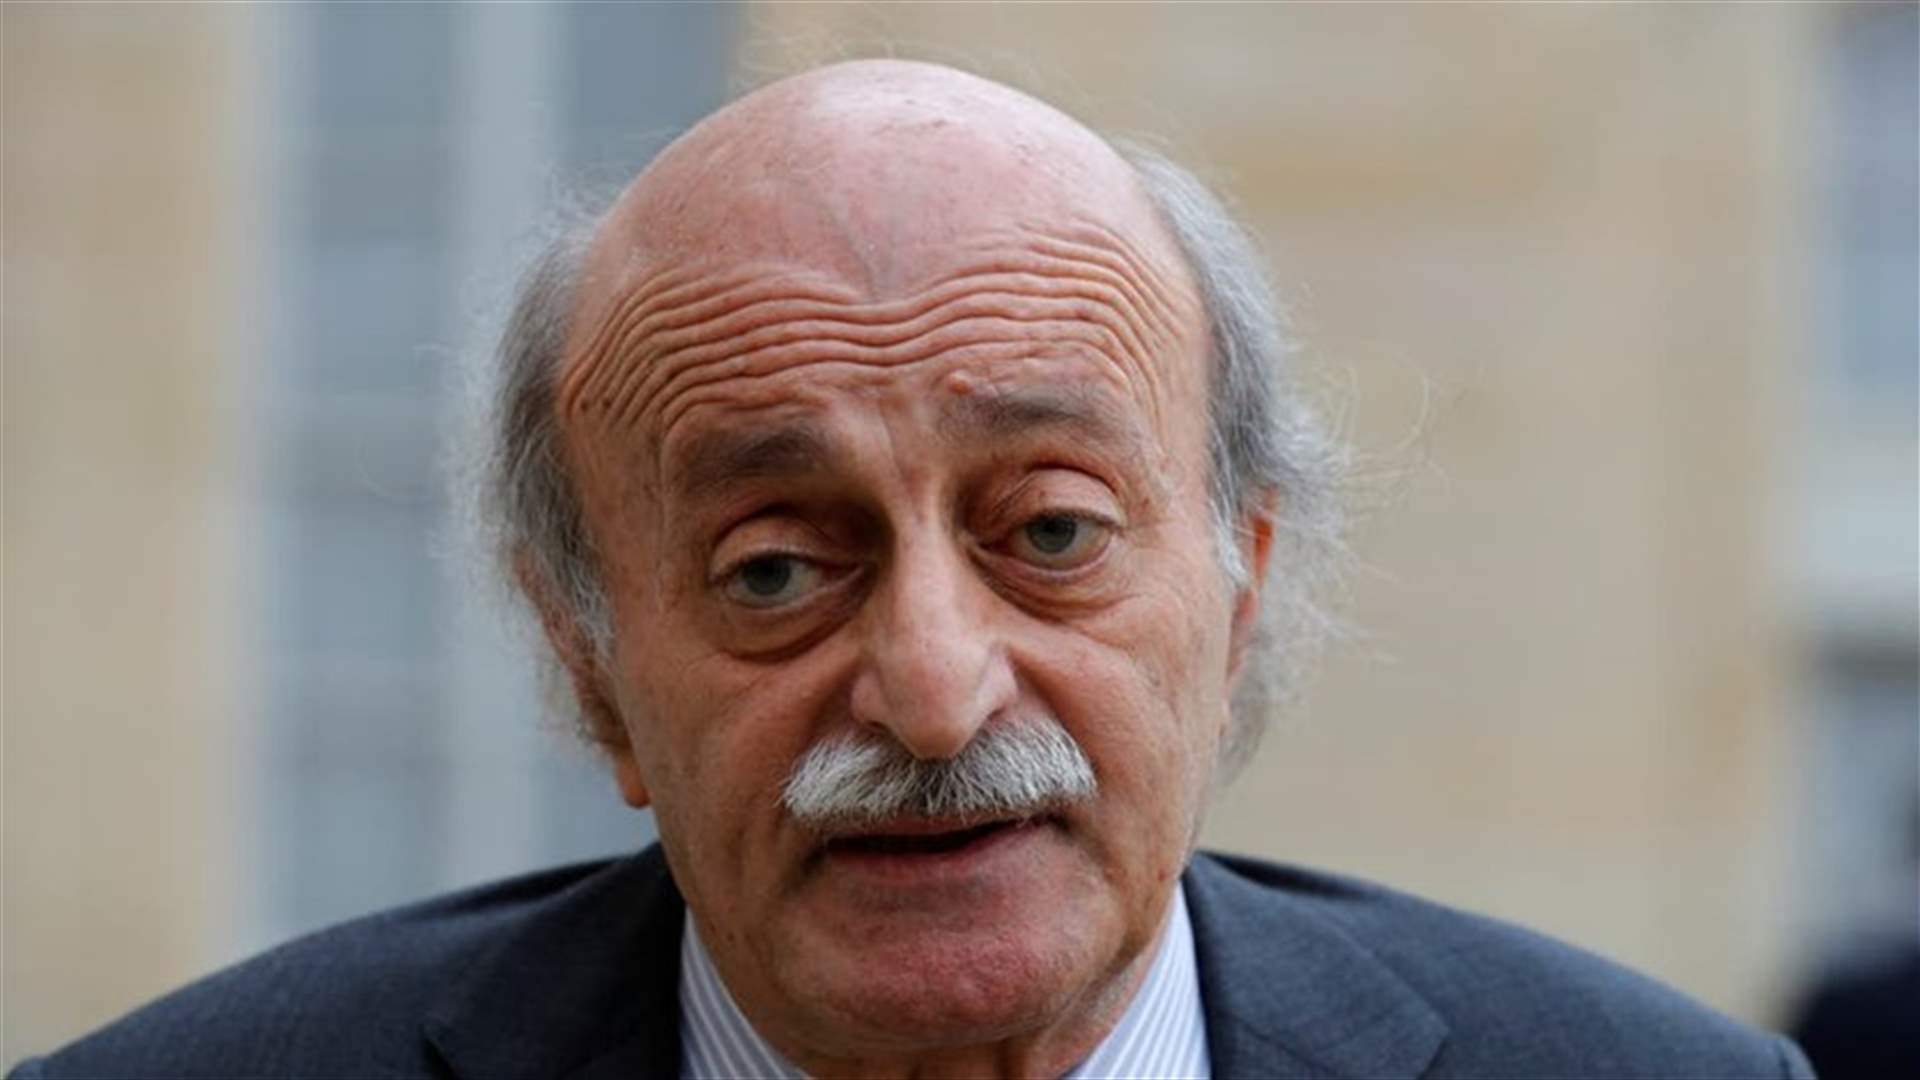 Walid Joumblatt: We seem to have entered into an open war